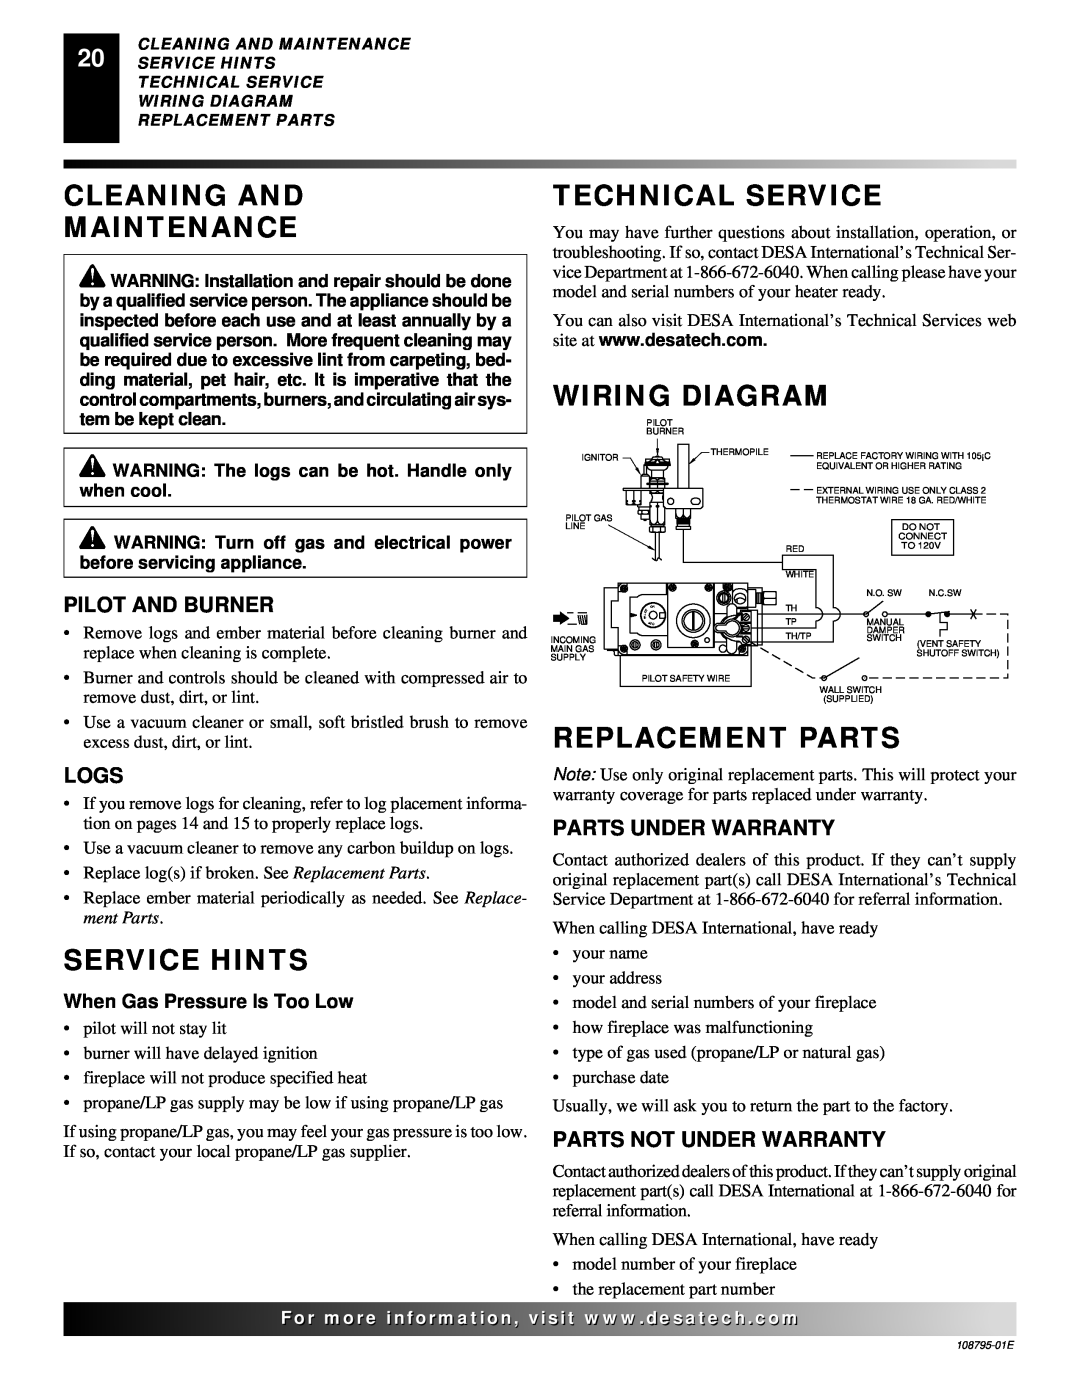 Desa M36, VM42 Cleaning And Maintenance, Technical Service, Wiring Diagram, Service Hints, Replacement Parts 